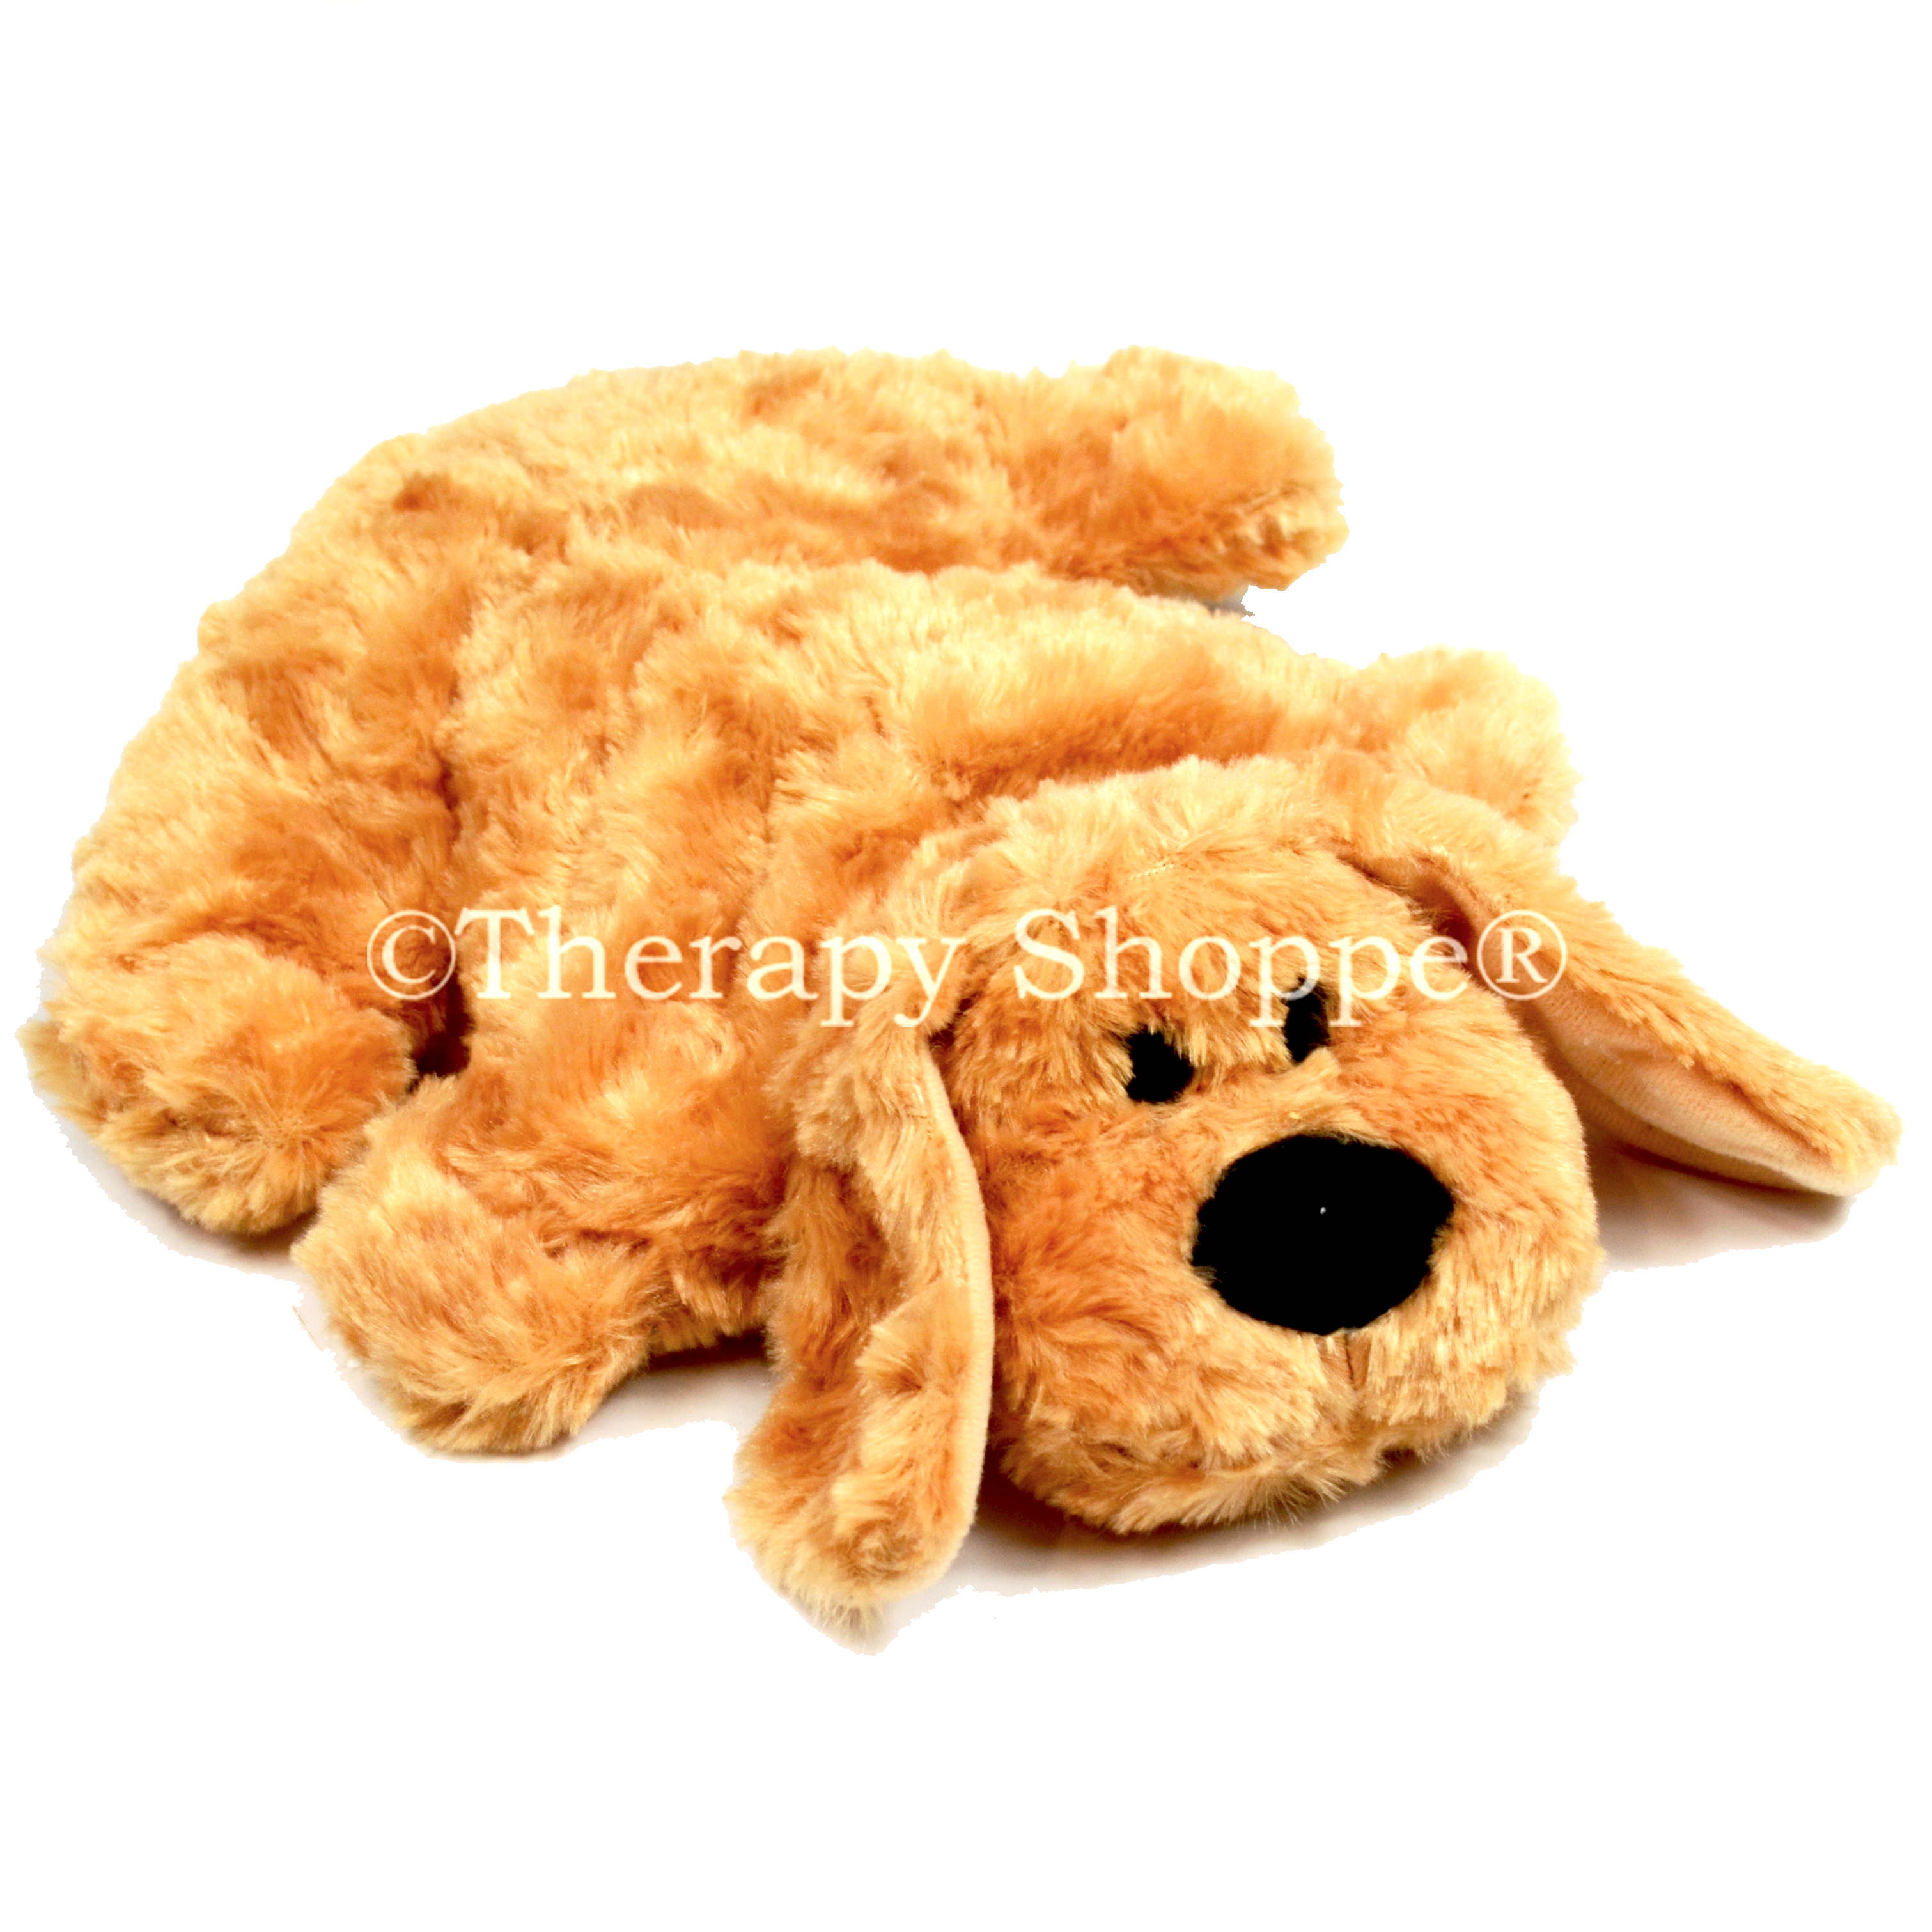 https://www.therapyshoppe.com/components/com_redshop/assets/images/product/1572536647_shaggy-puppy-weighted-deep-pressure-ther.png